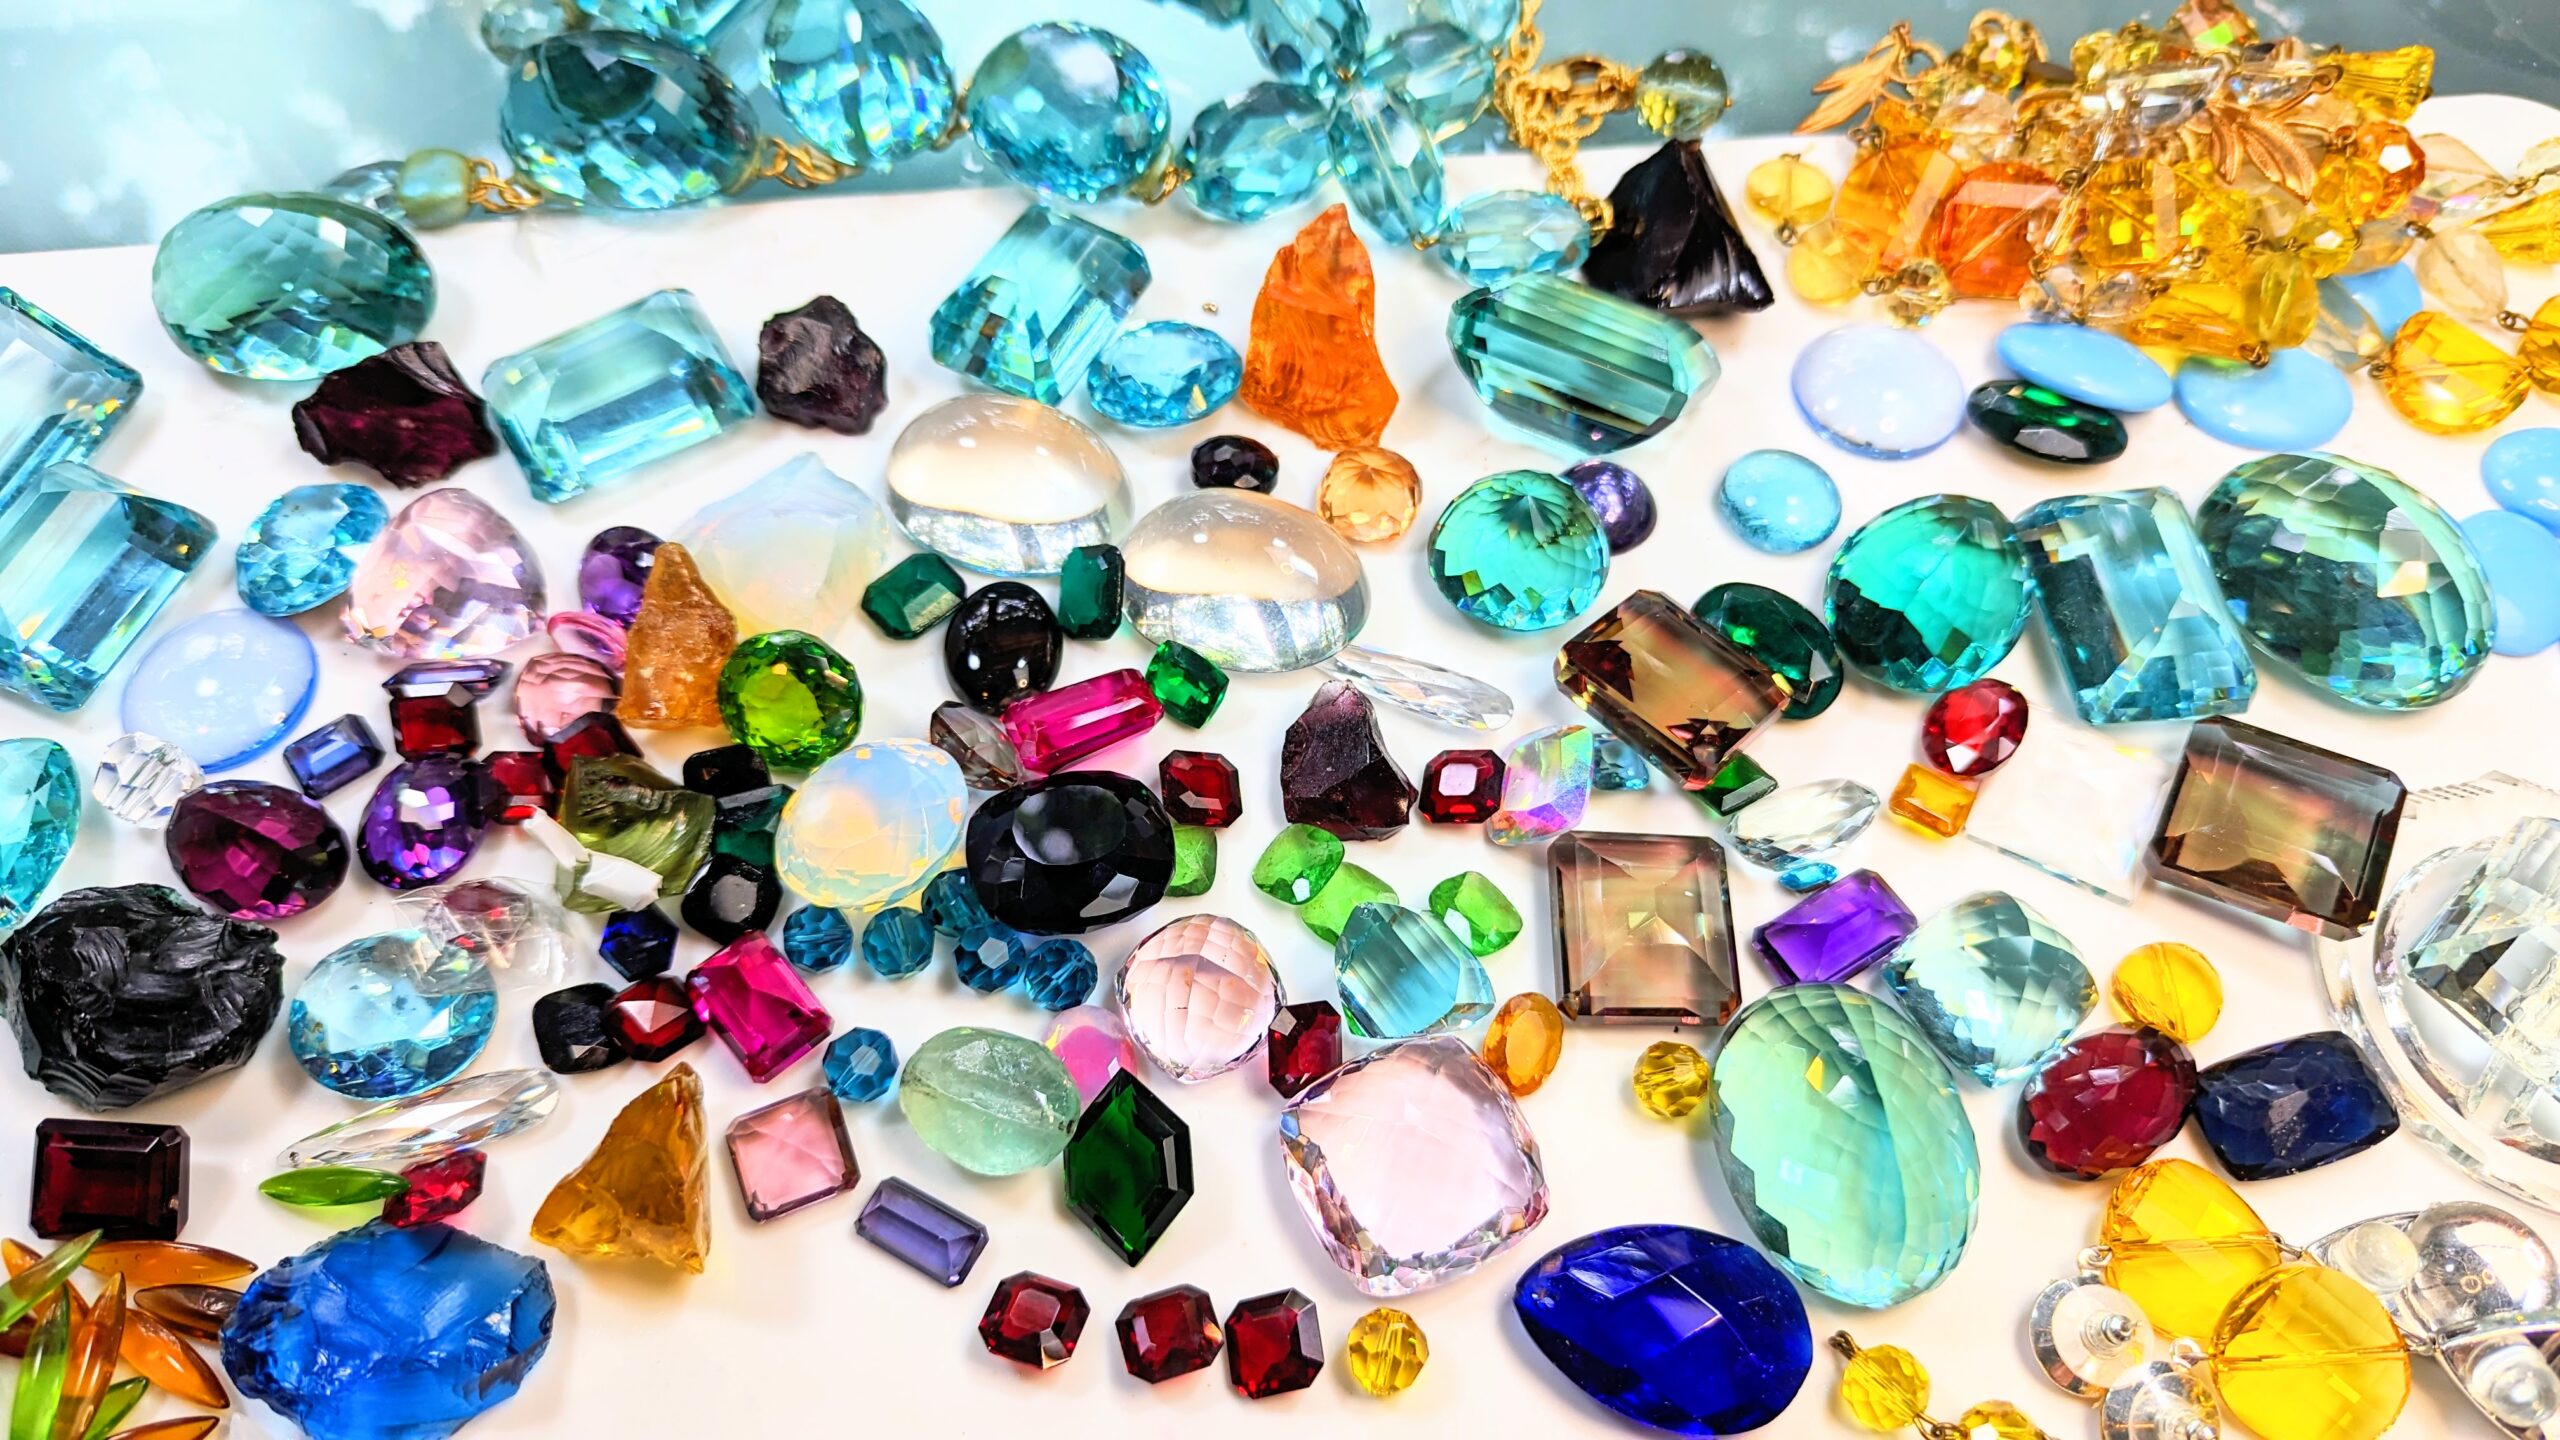 A variety of stones in all colors